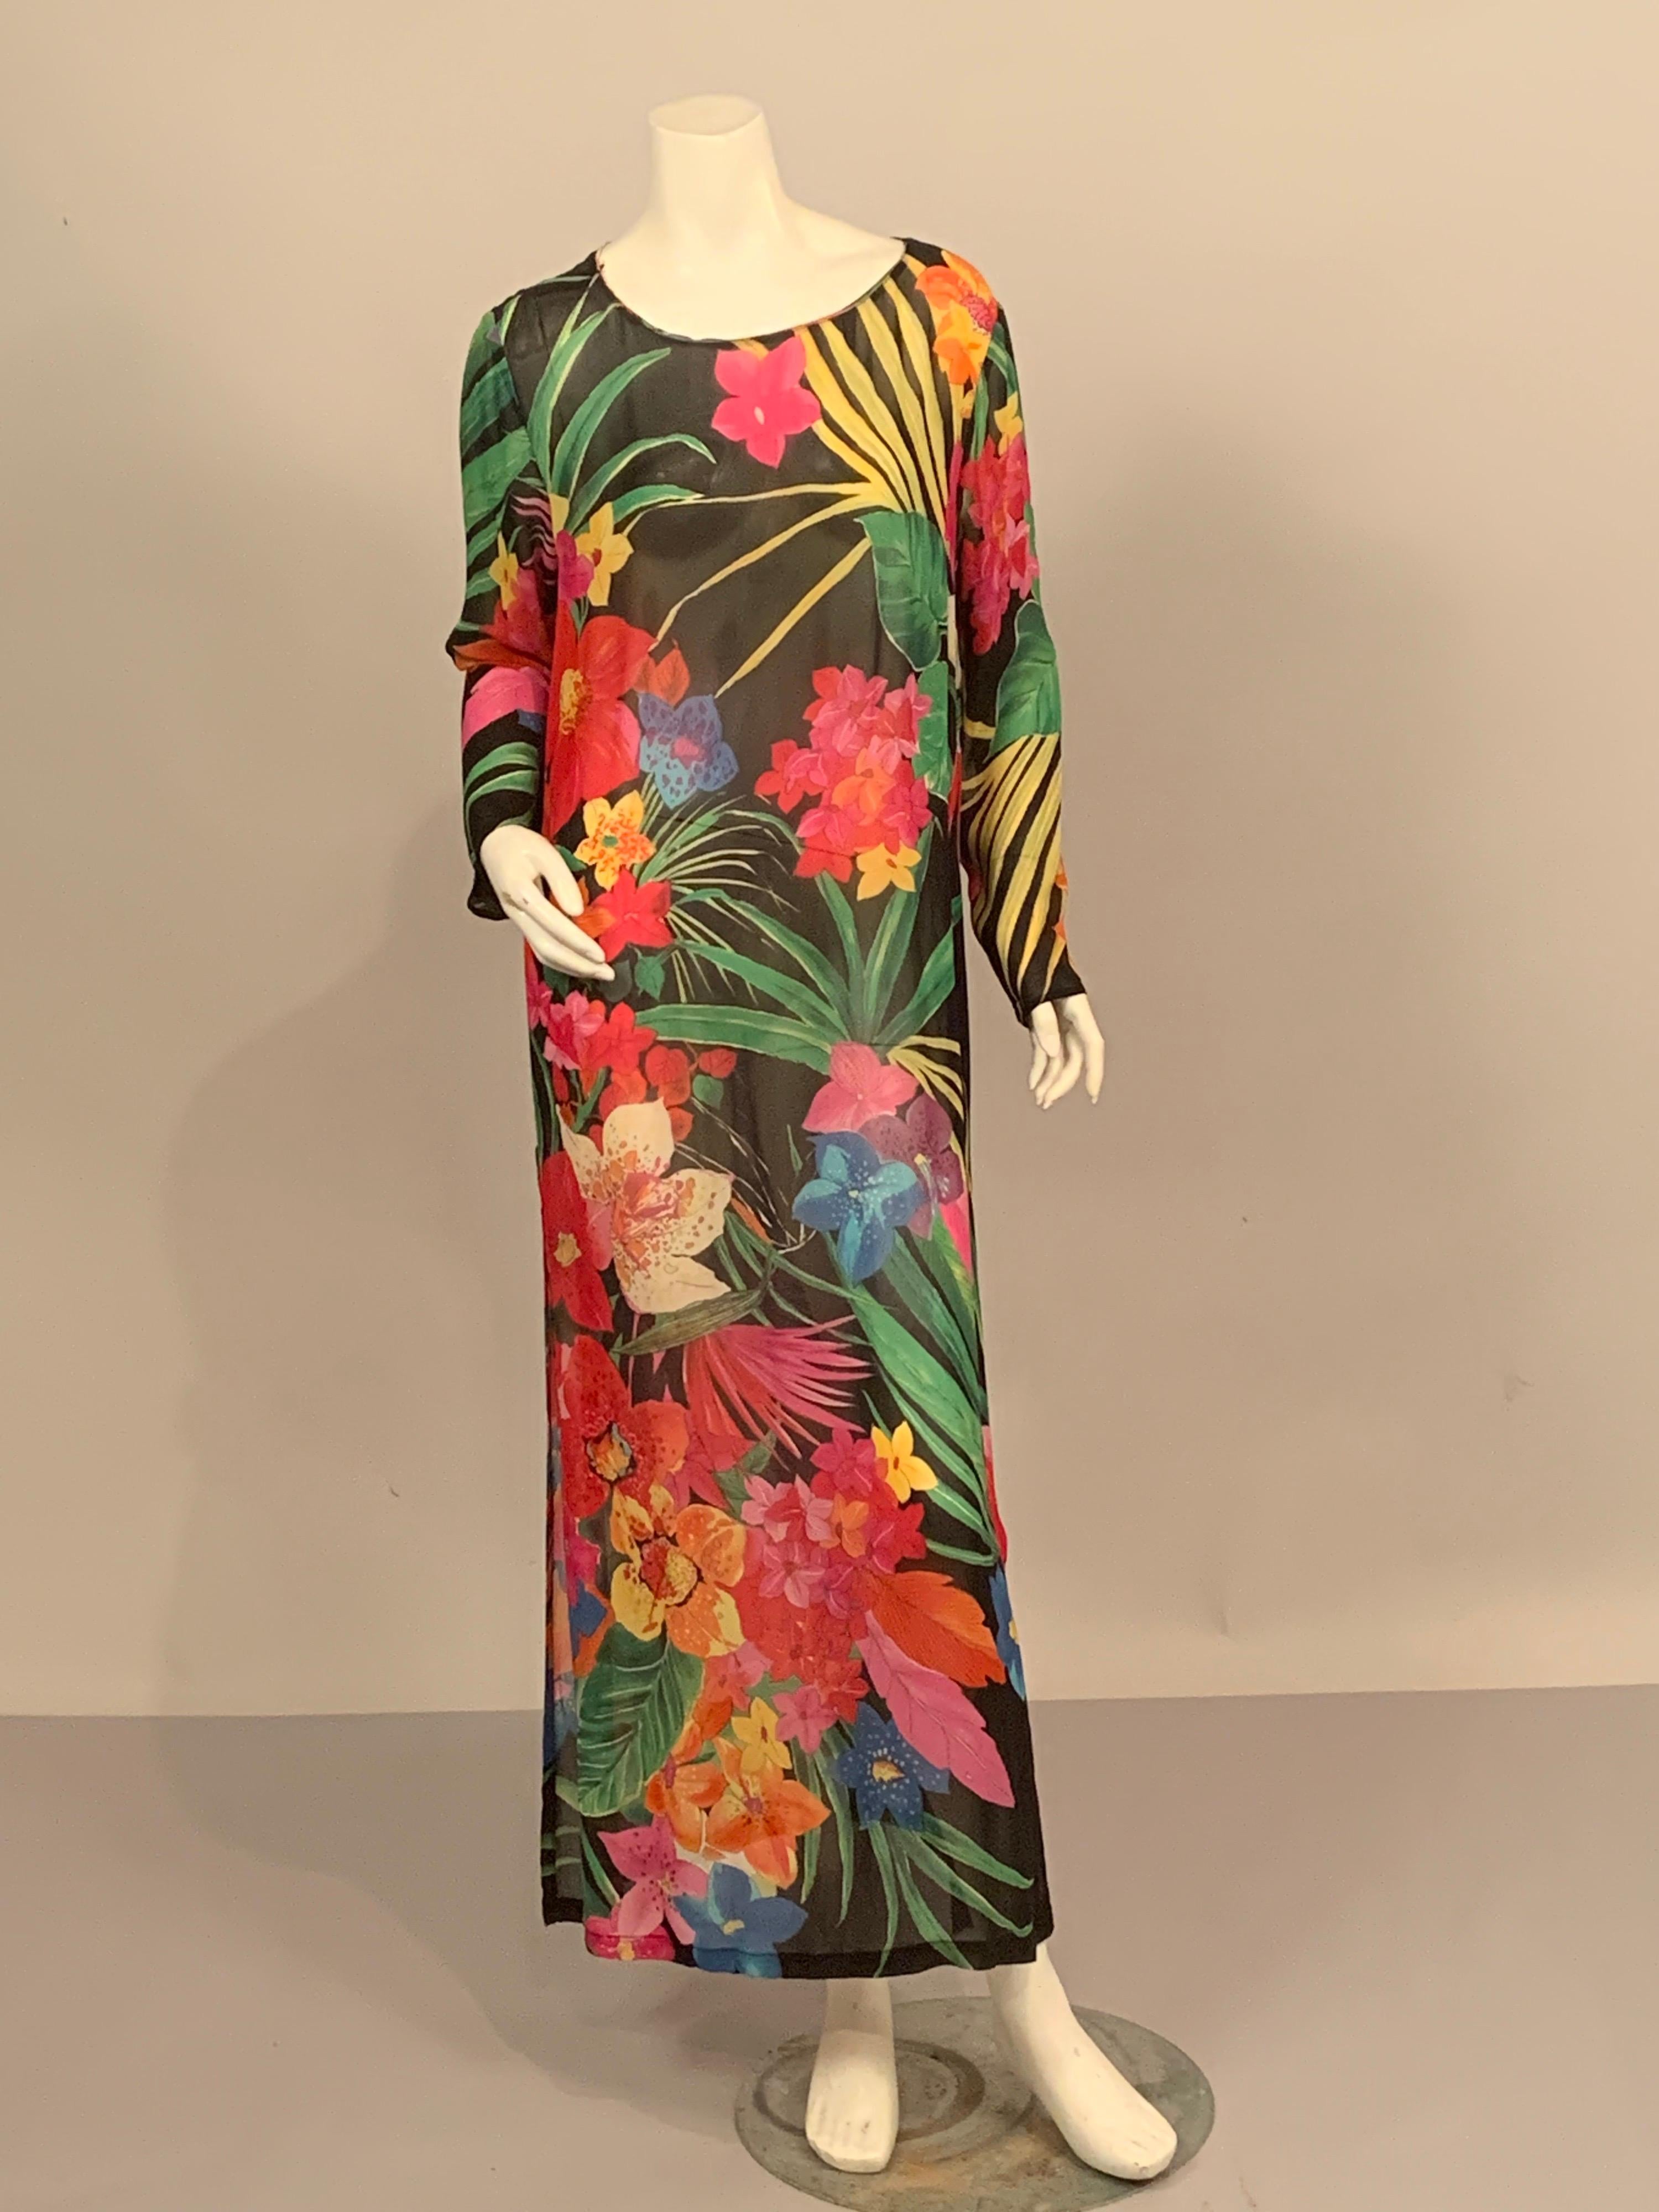 Start planning your Island vacation now because this is your perfect dress or caftan.  The sheer black background allows the brilliant tropical blooms to be so eye catching.  Shades of pink, red, orange, yellow, blue purple and green just pop